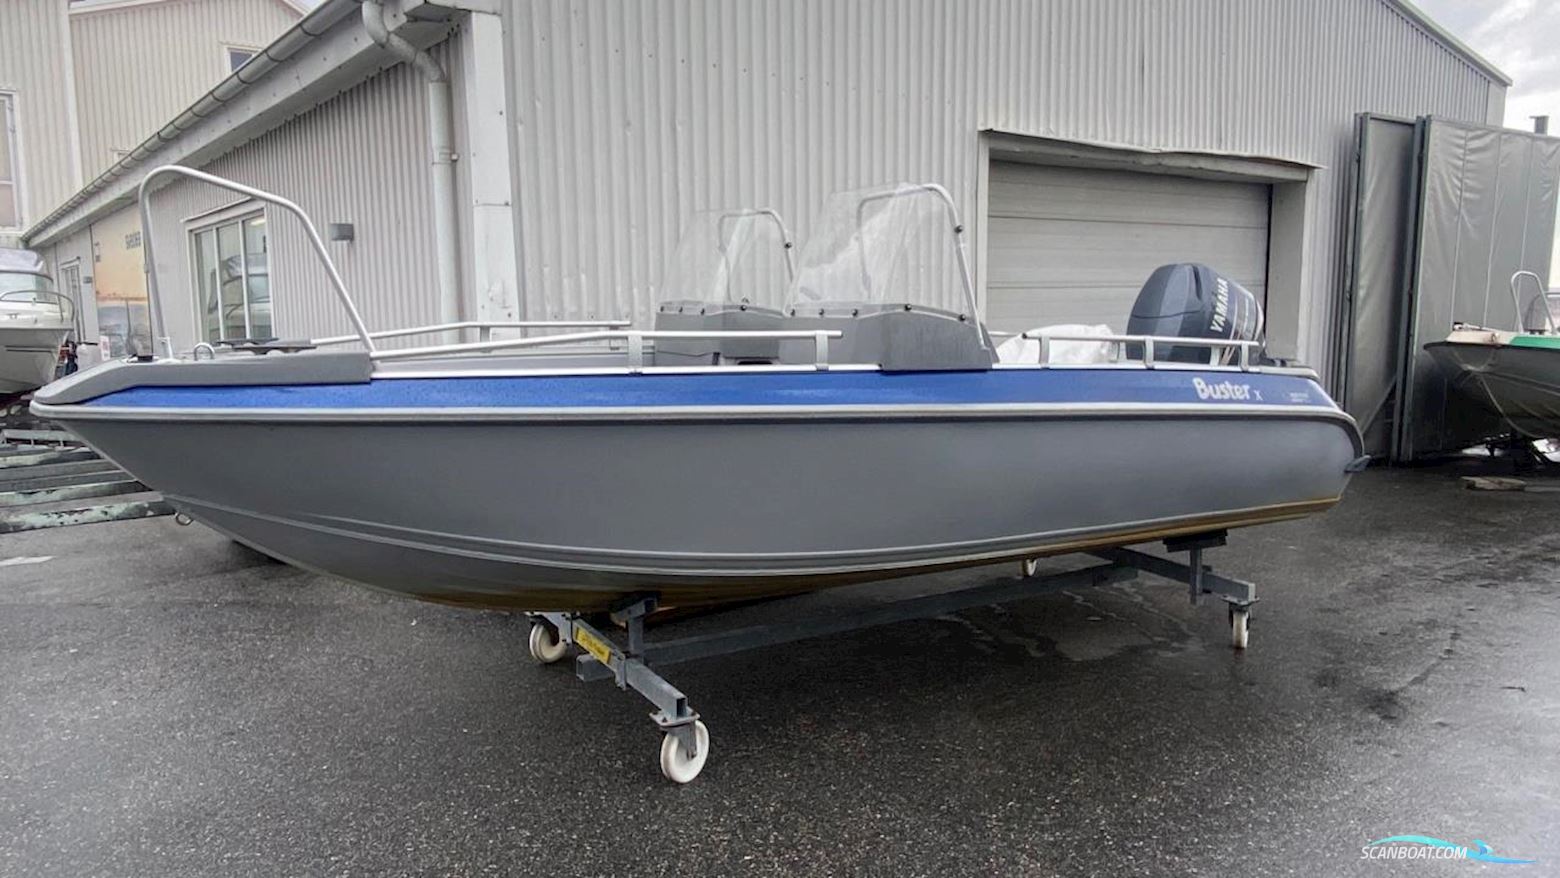 Buster X Motor boat 2008, with Yamaha engine, Sweden